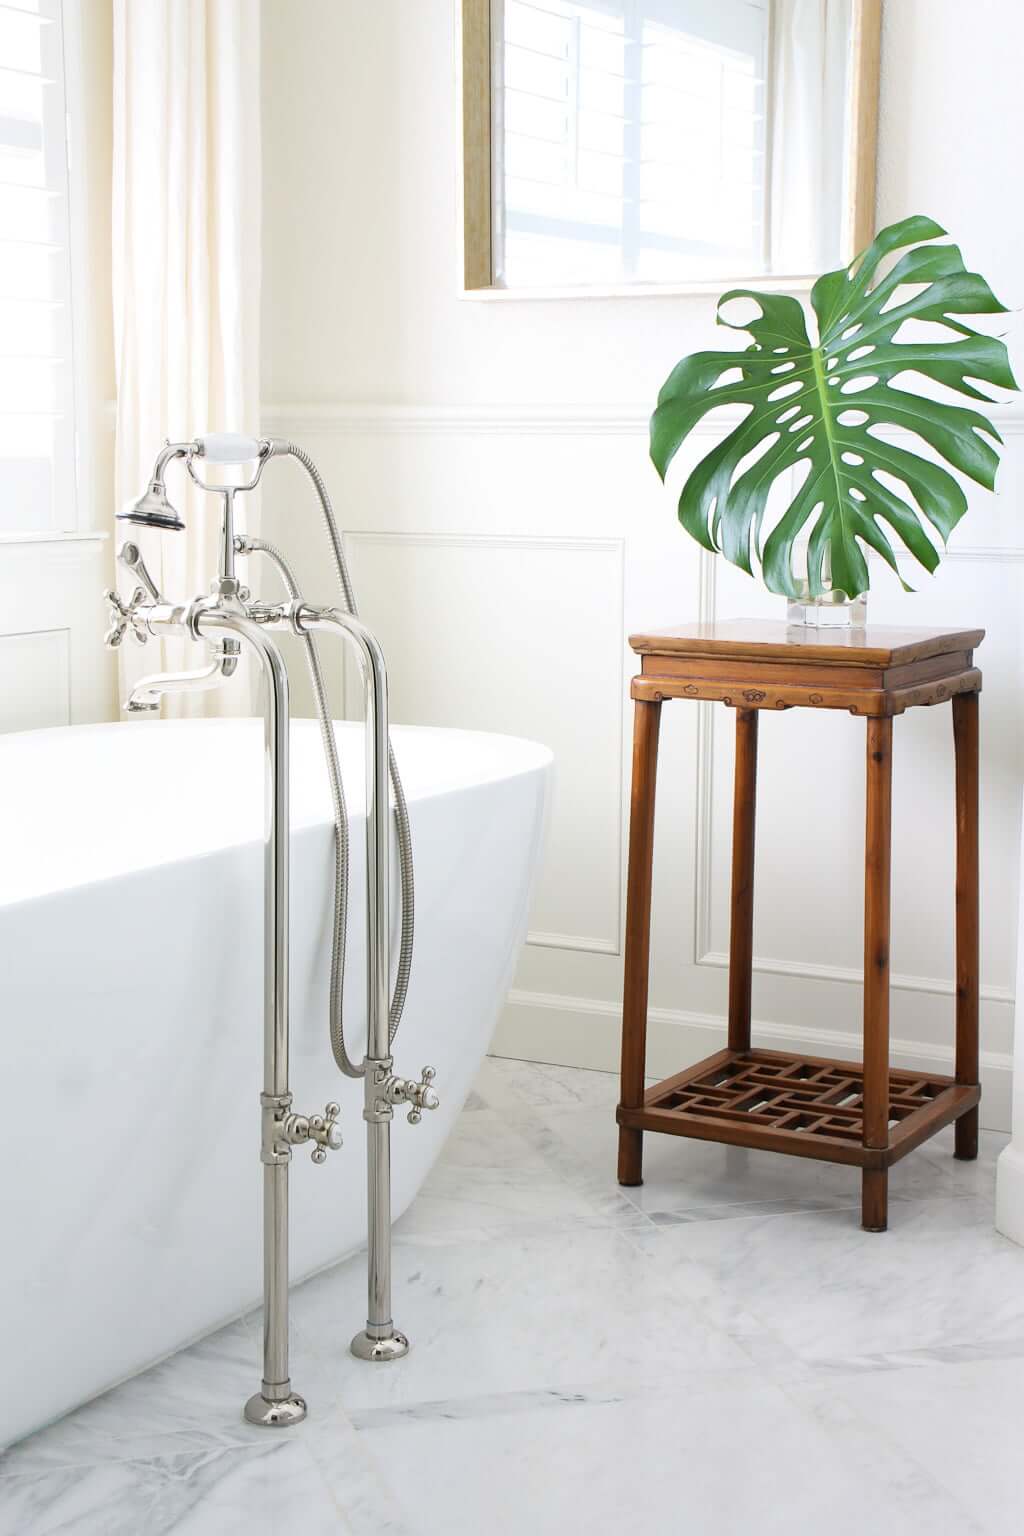 freestanding tub with marble floors and antique plant stand